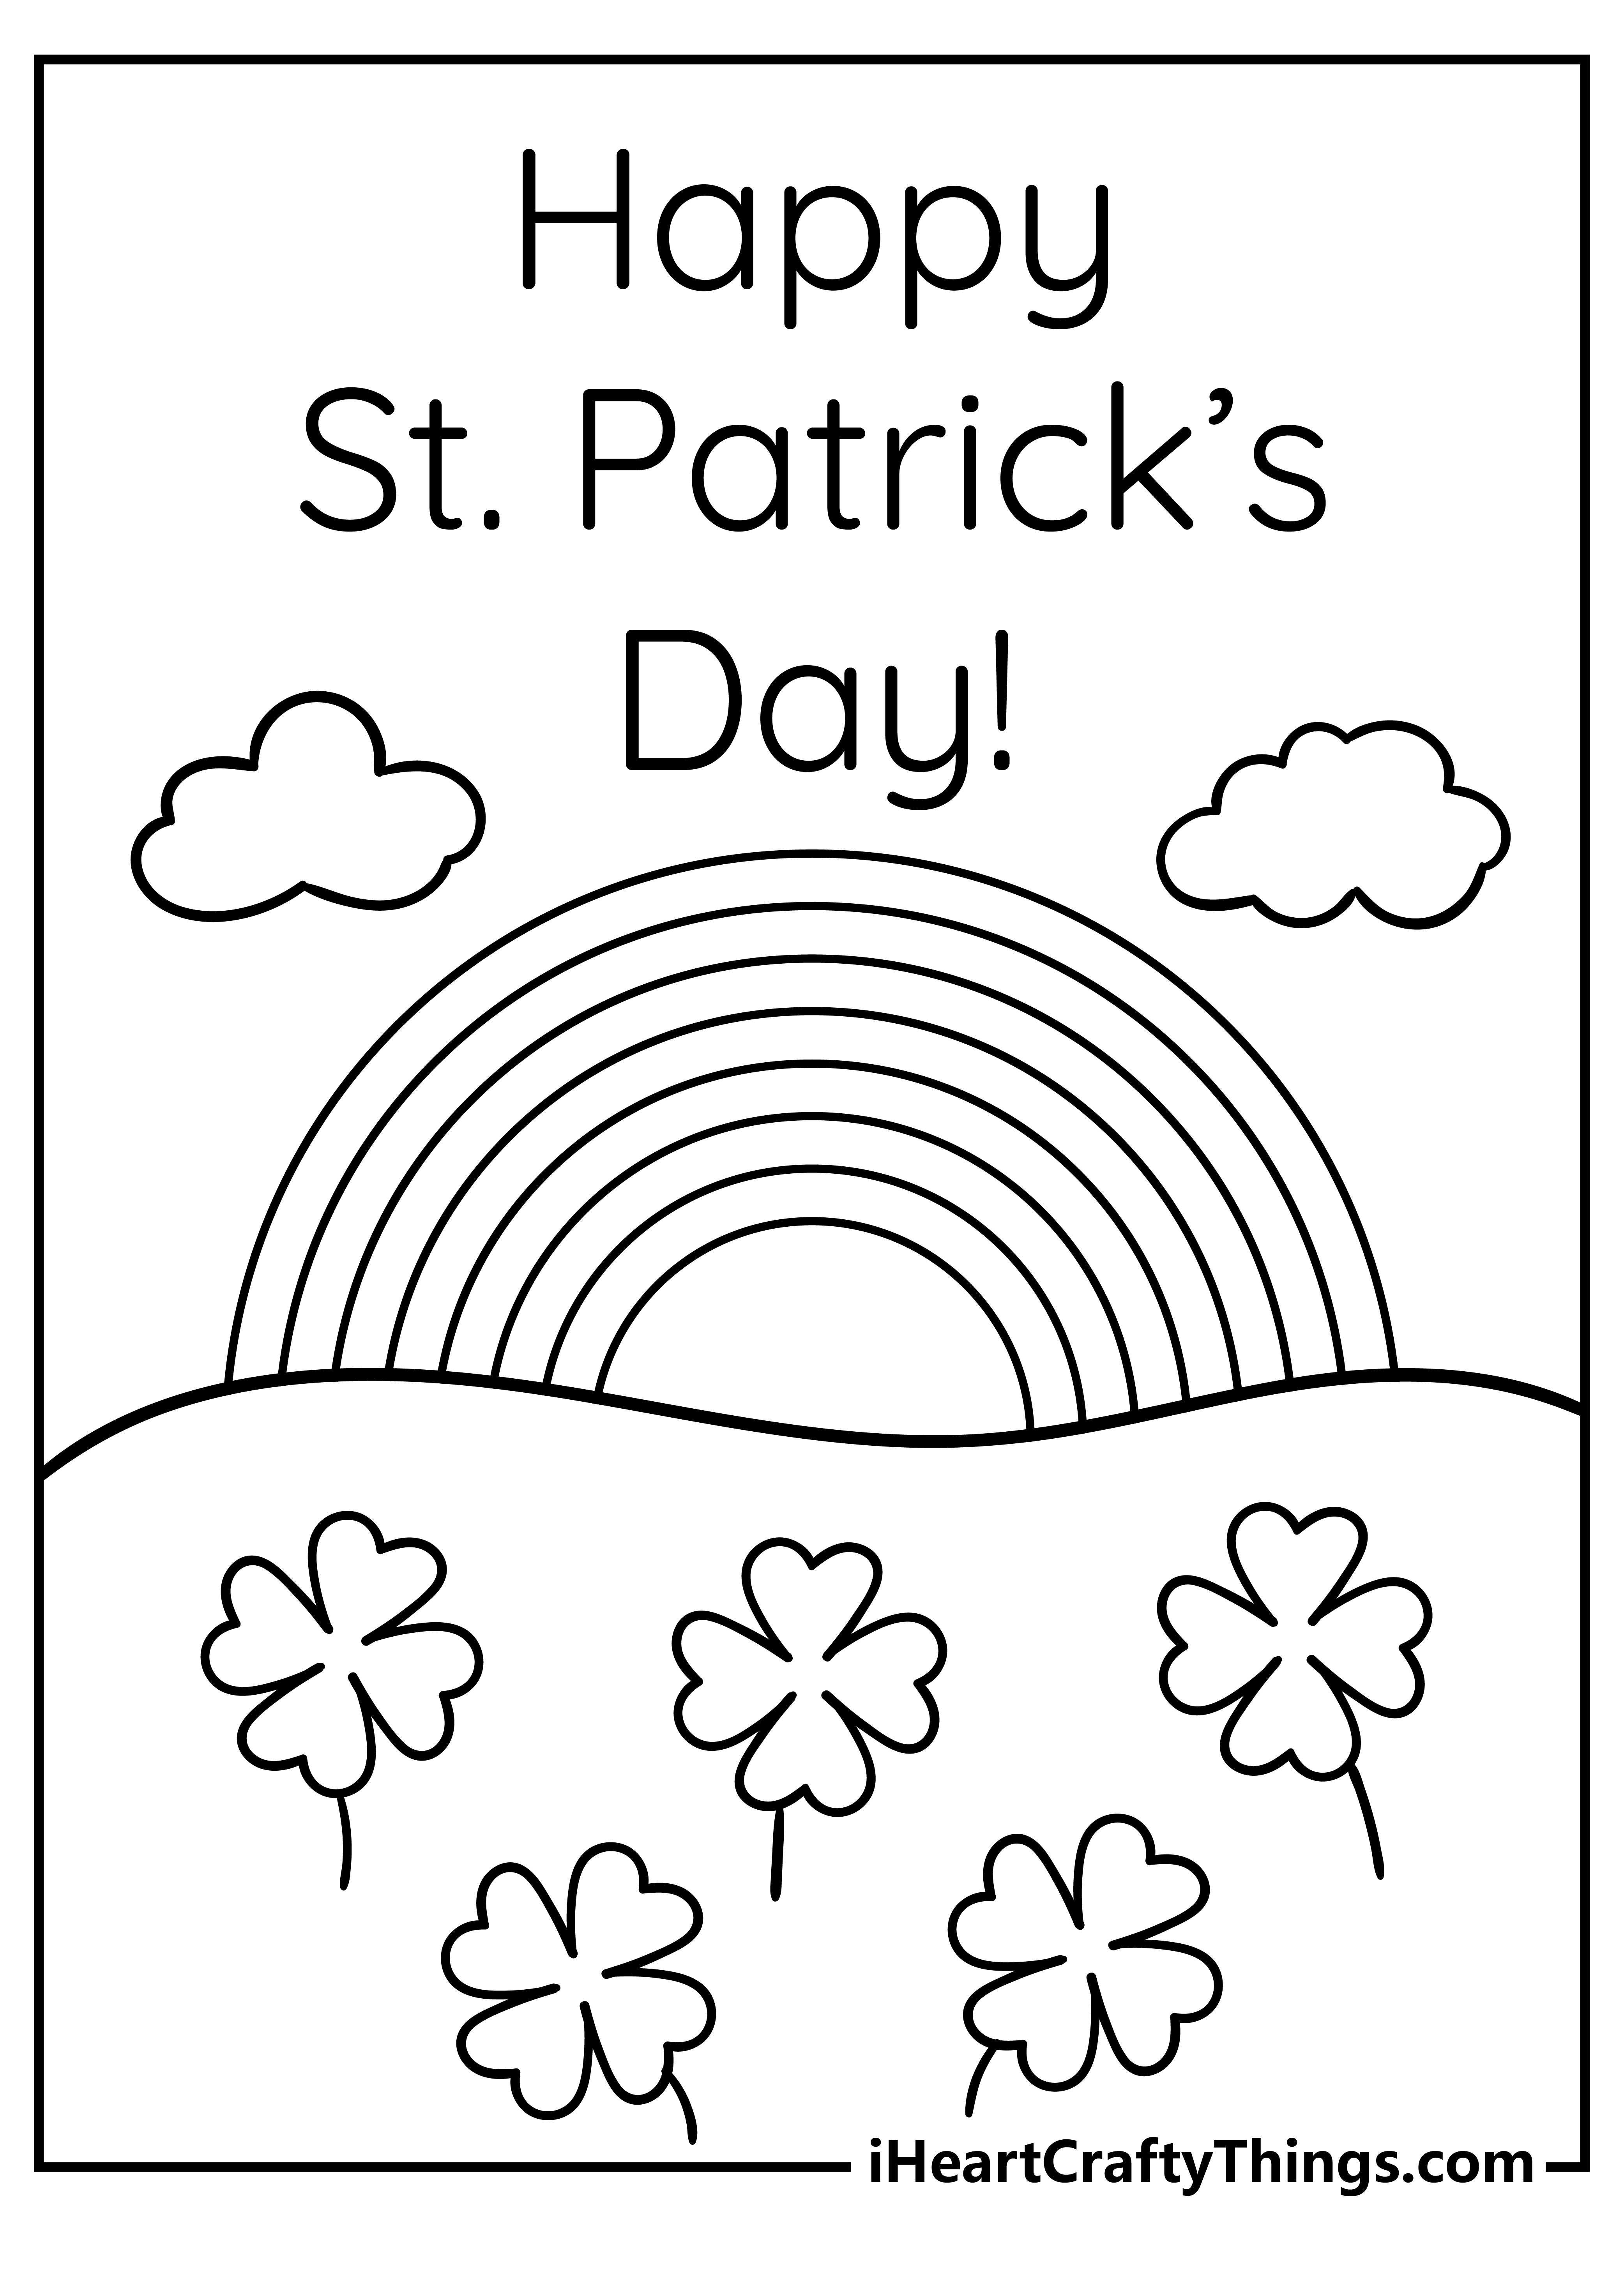 St Patrick’s Day Coloring Book for kids free printable